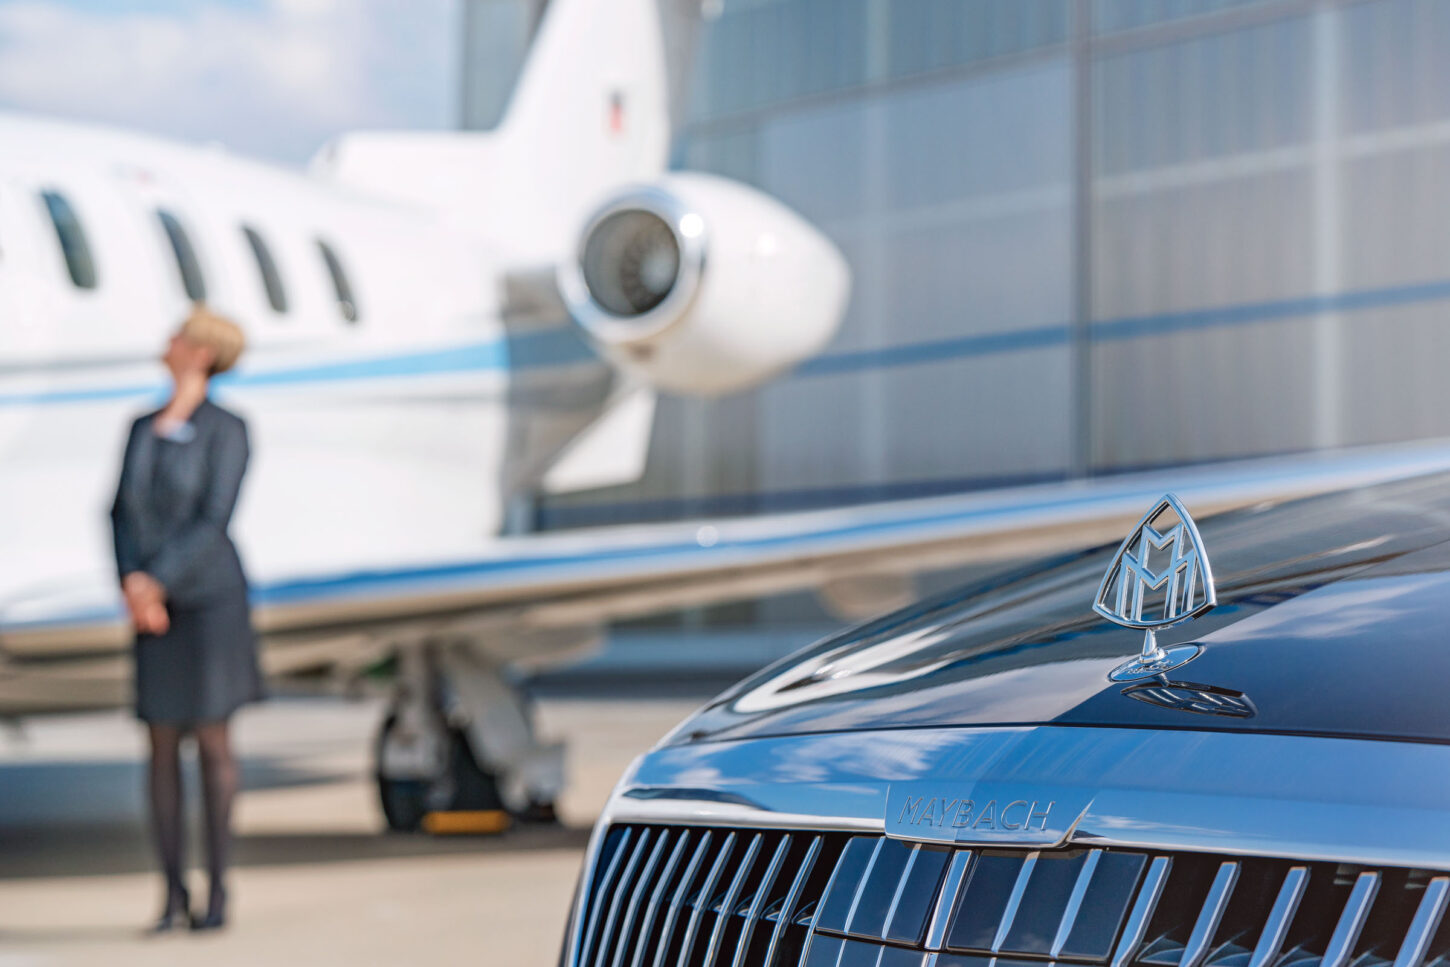 Maybach limousine in the foreground, aircraft and flight attendant in the background